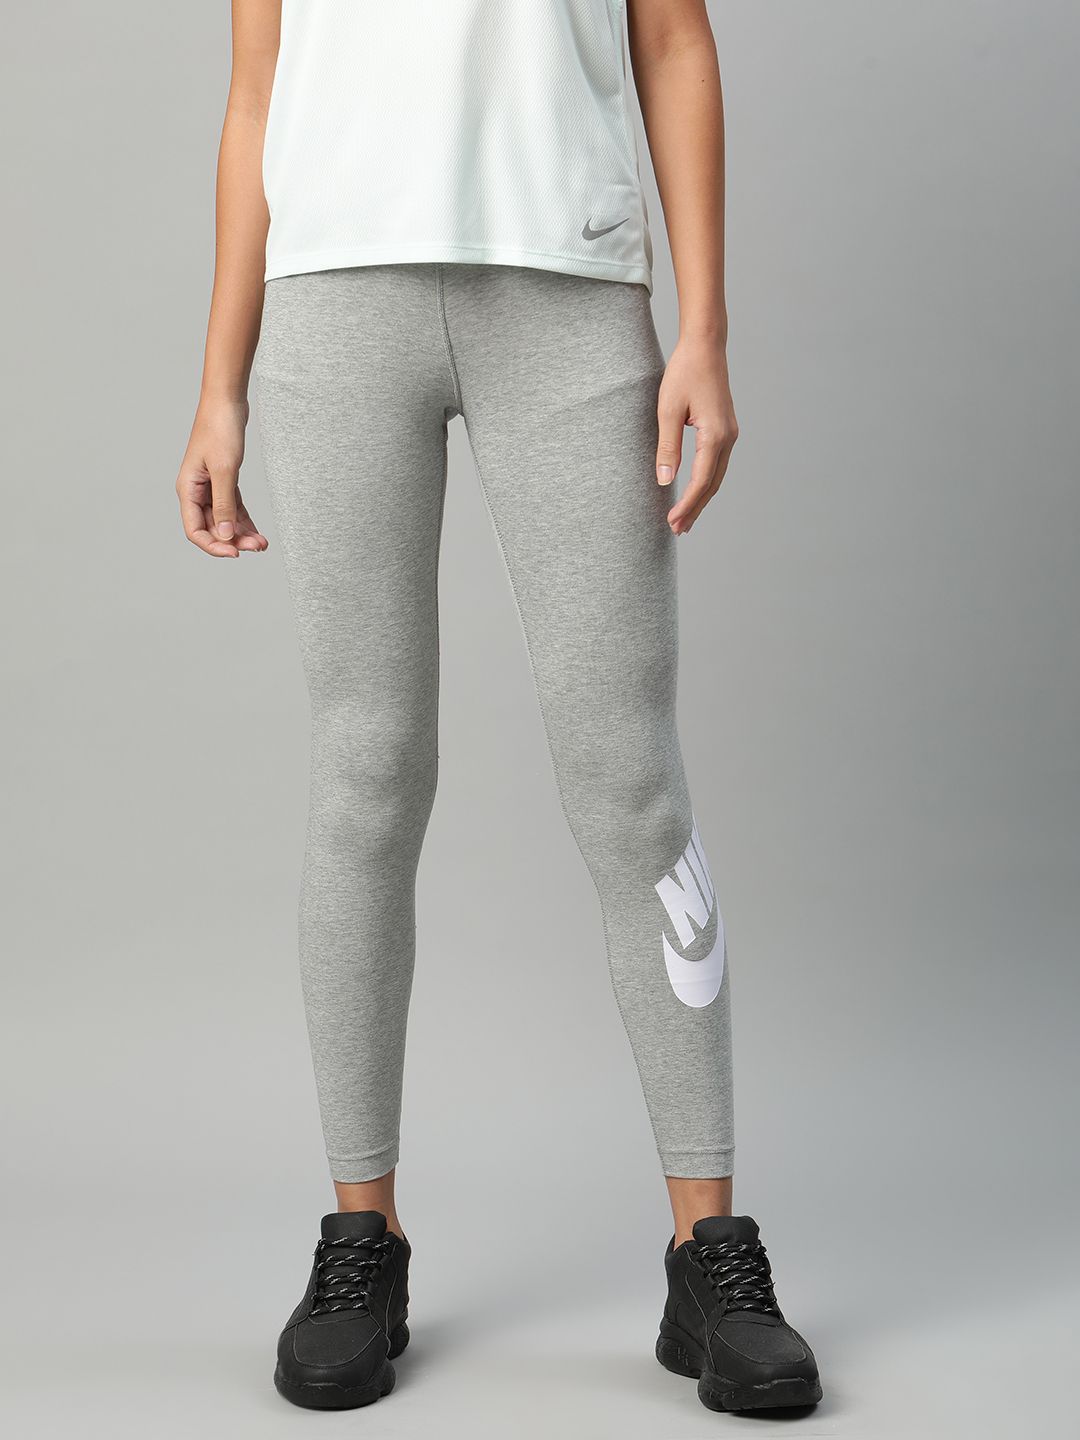 Nike Women Grey Printed Essential High-Rise Tights Price in India